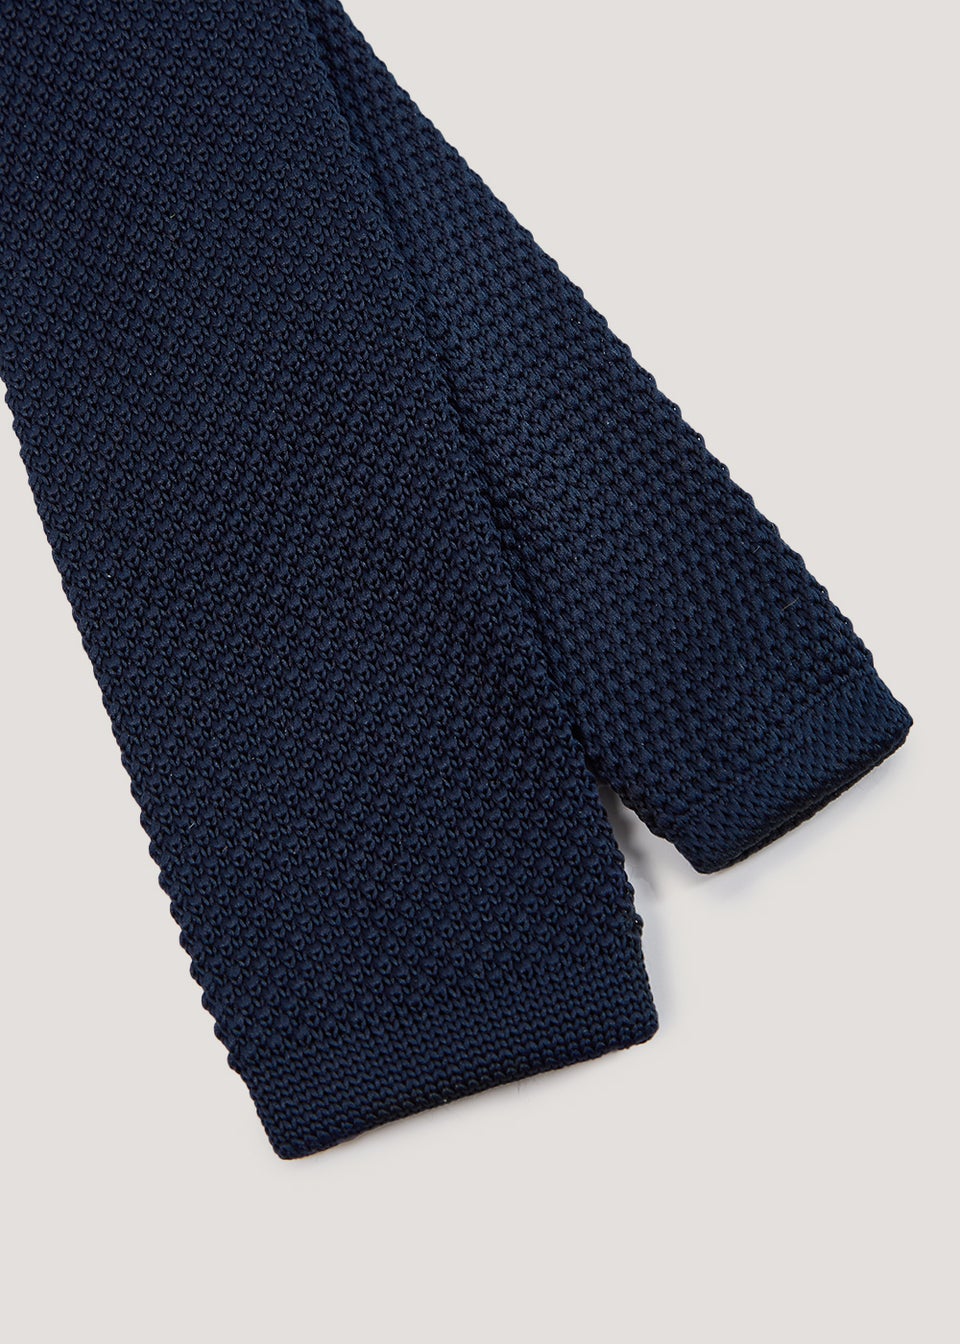 Taylor & Wright Navy Knitted Tie